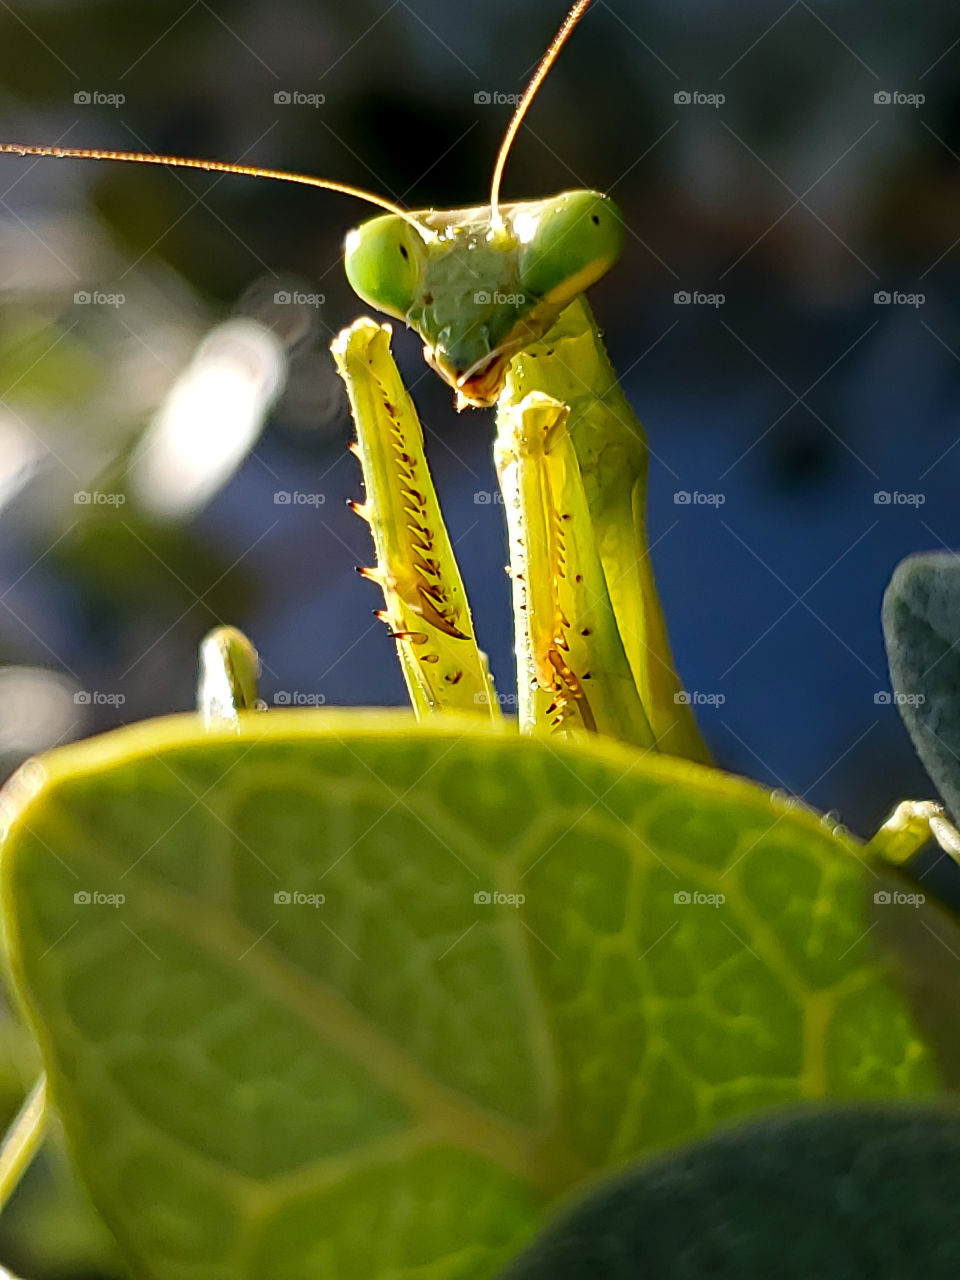 Close up of a female praying mantis illuminated by morning sunlight while staring directly at the camera as if saying "hey man what do you want! "